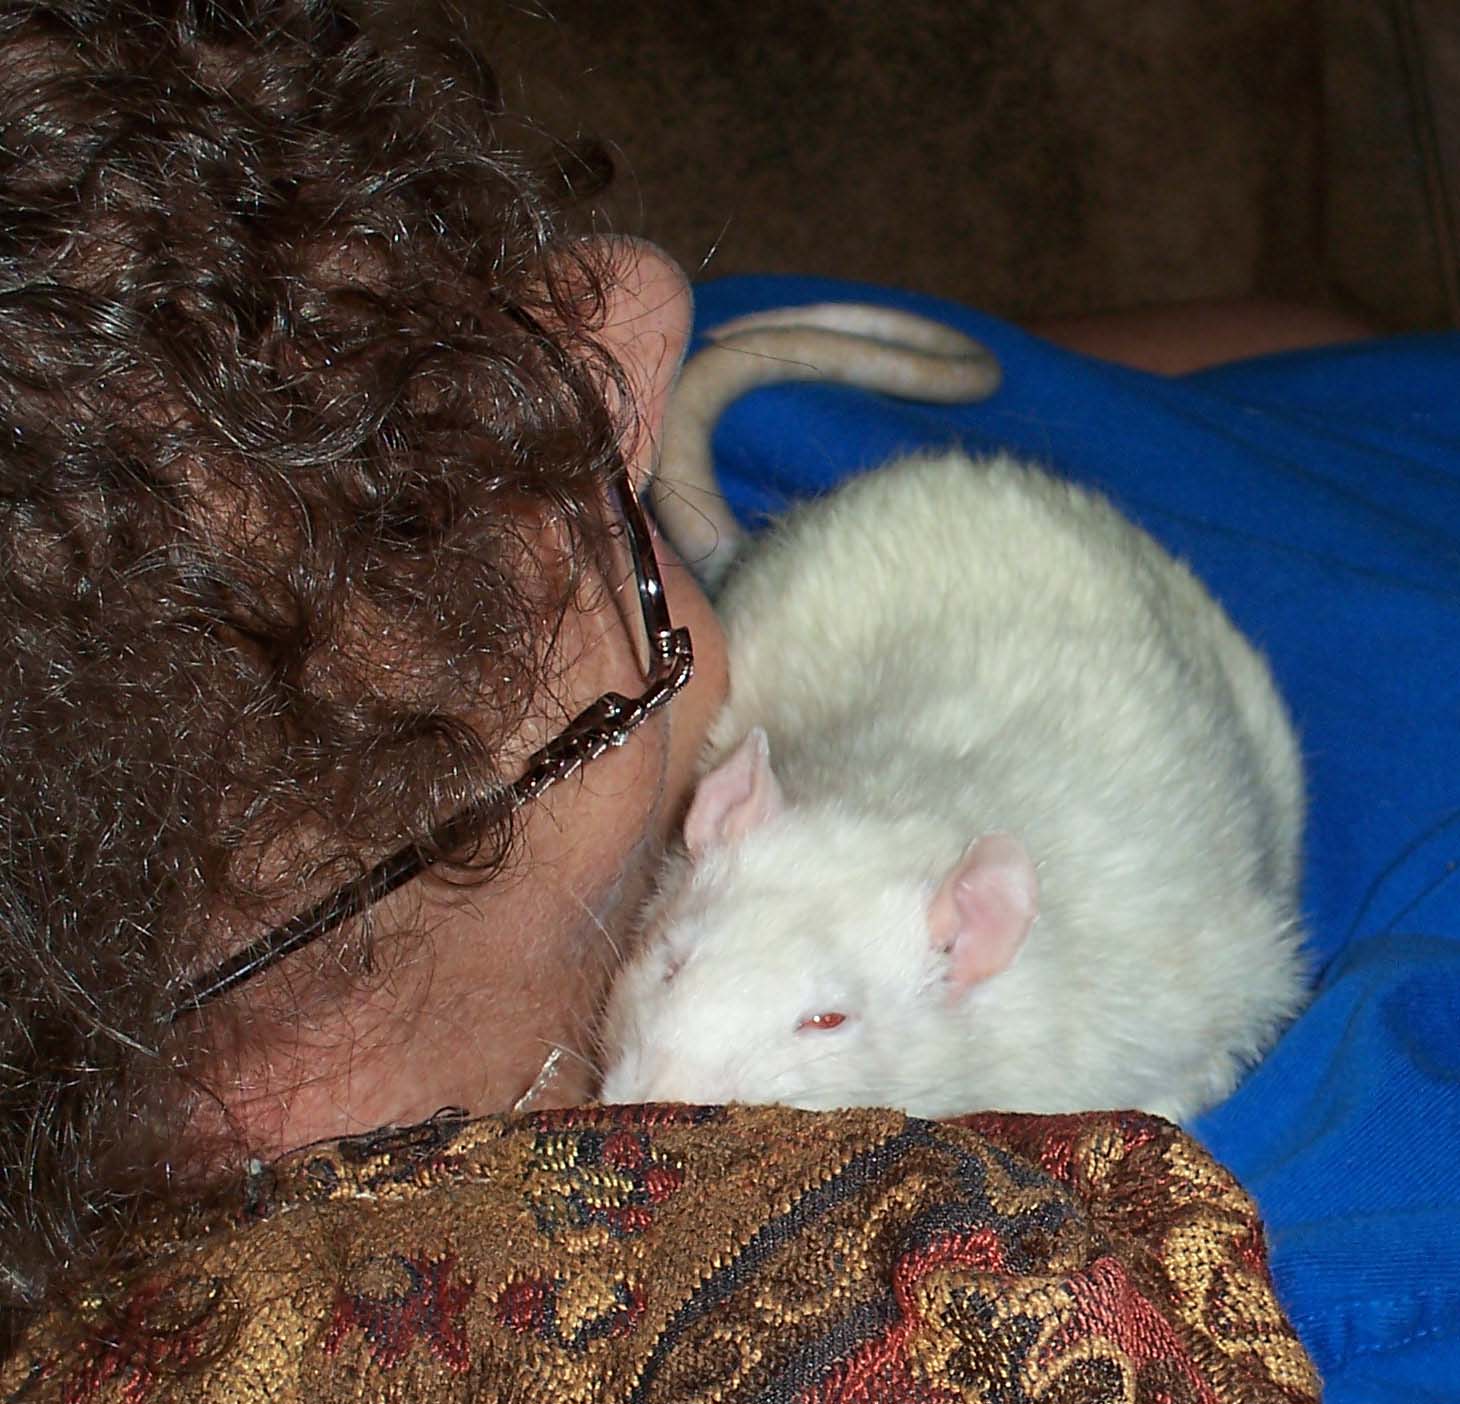 [Wolfie+snuggling+with+Mom+1+-+May+2008.jpg]